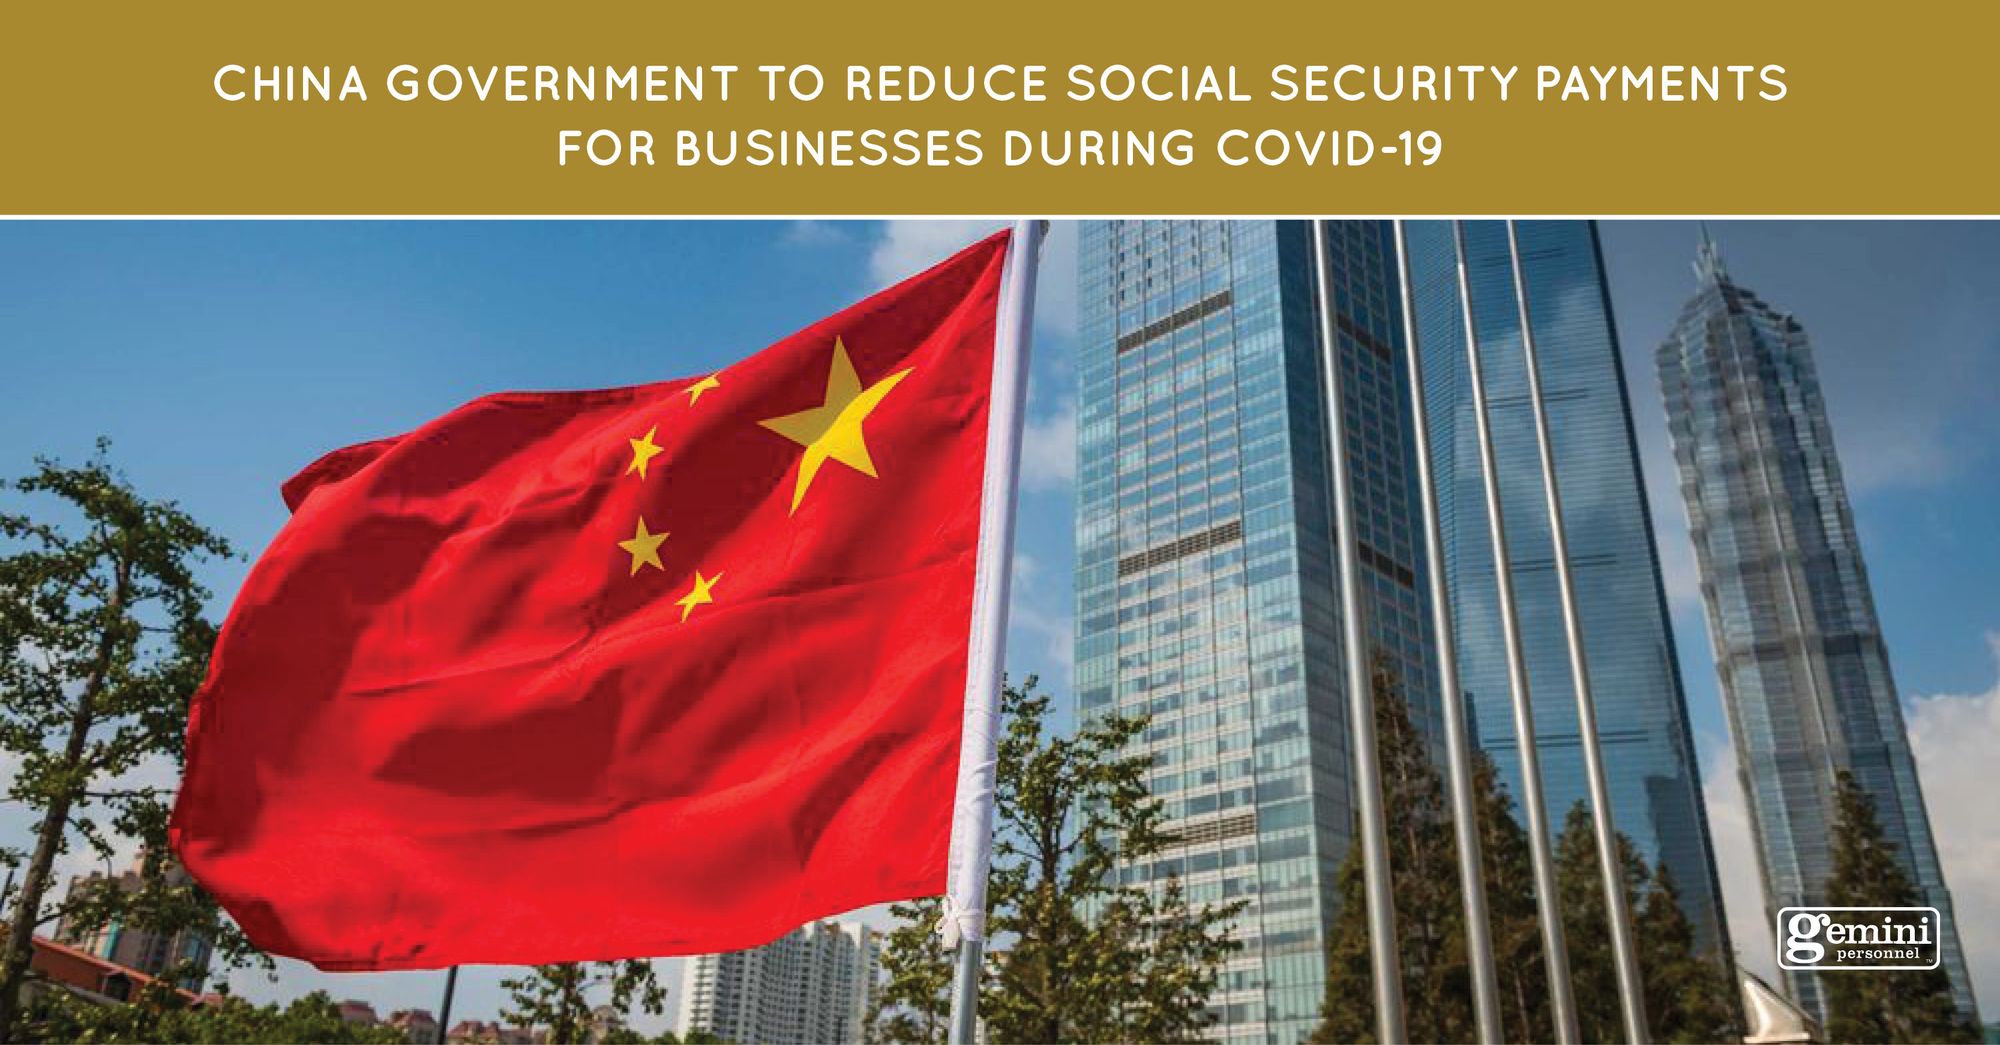 China government to reduce social security payments for businesses during Covid-19